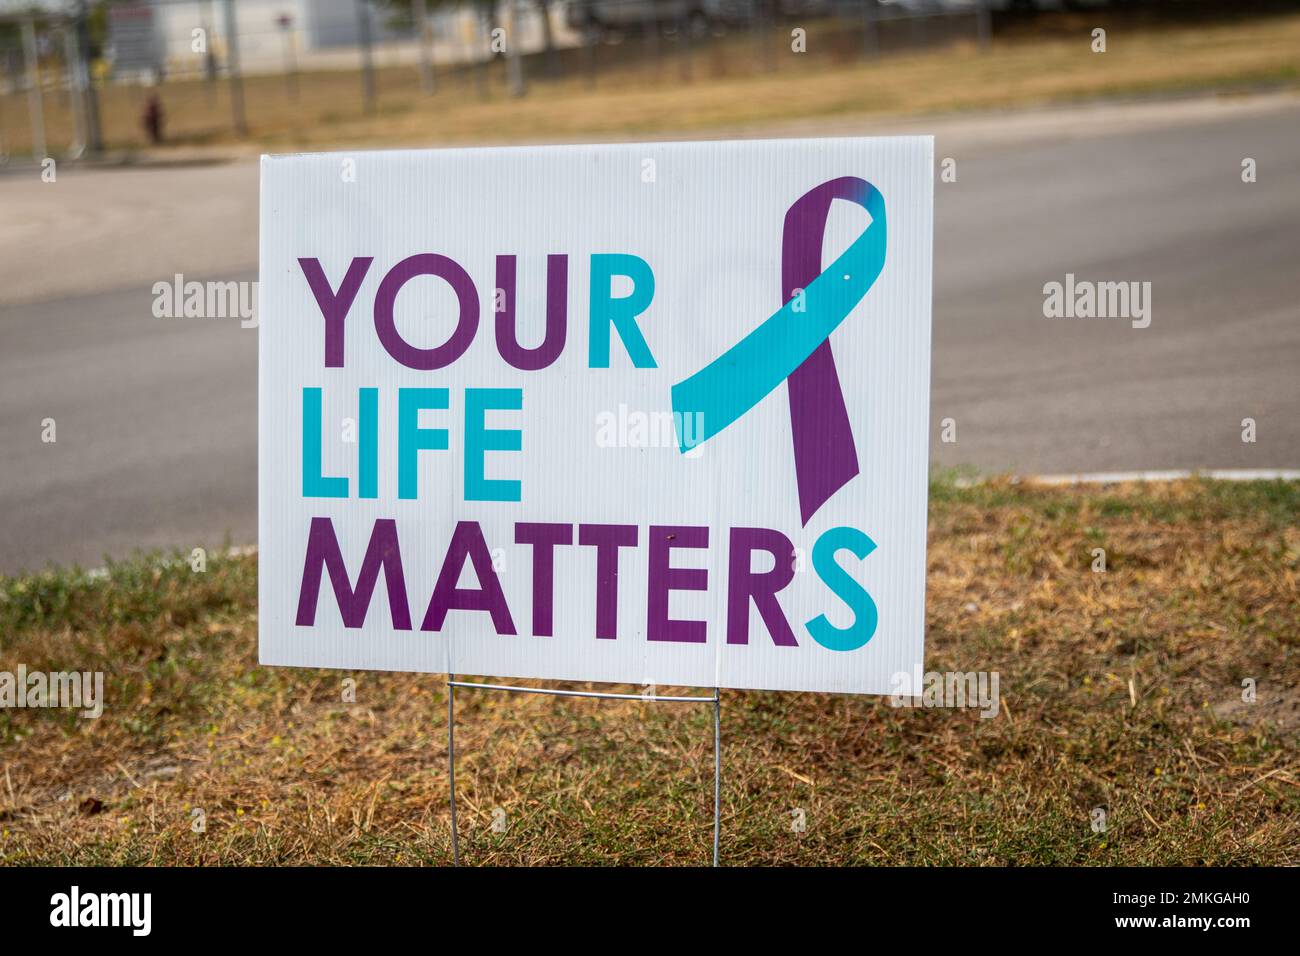 A sign reading 'Your Life Matters' is seen at the entrance to the Nebraska National Guard air base in Lincoln, Nebraska, on Sept. 9, 2022. September is National Suicide Prevention Awareness Month and Sept. 10, 2022 is World Suicide Prevention Day. If you or someone you know is experiencing thoughts of suicide, know that you are not alone and that someone is always available to listen. Free and confidential support is available 24/7, 365 days a year with the National Veterans Crisis Line. Dial 988 then press 1 to get connected to a caring, qualified responder trained to support Veterans. The Ve Stock Photo